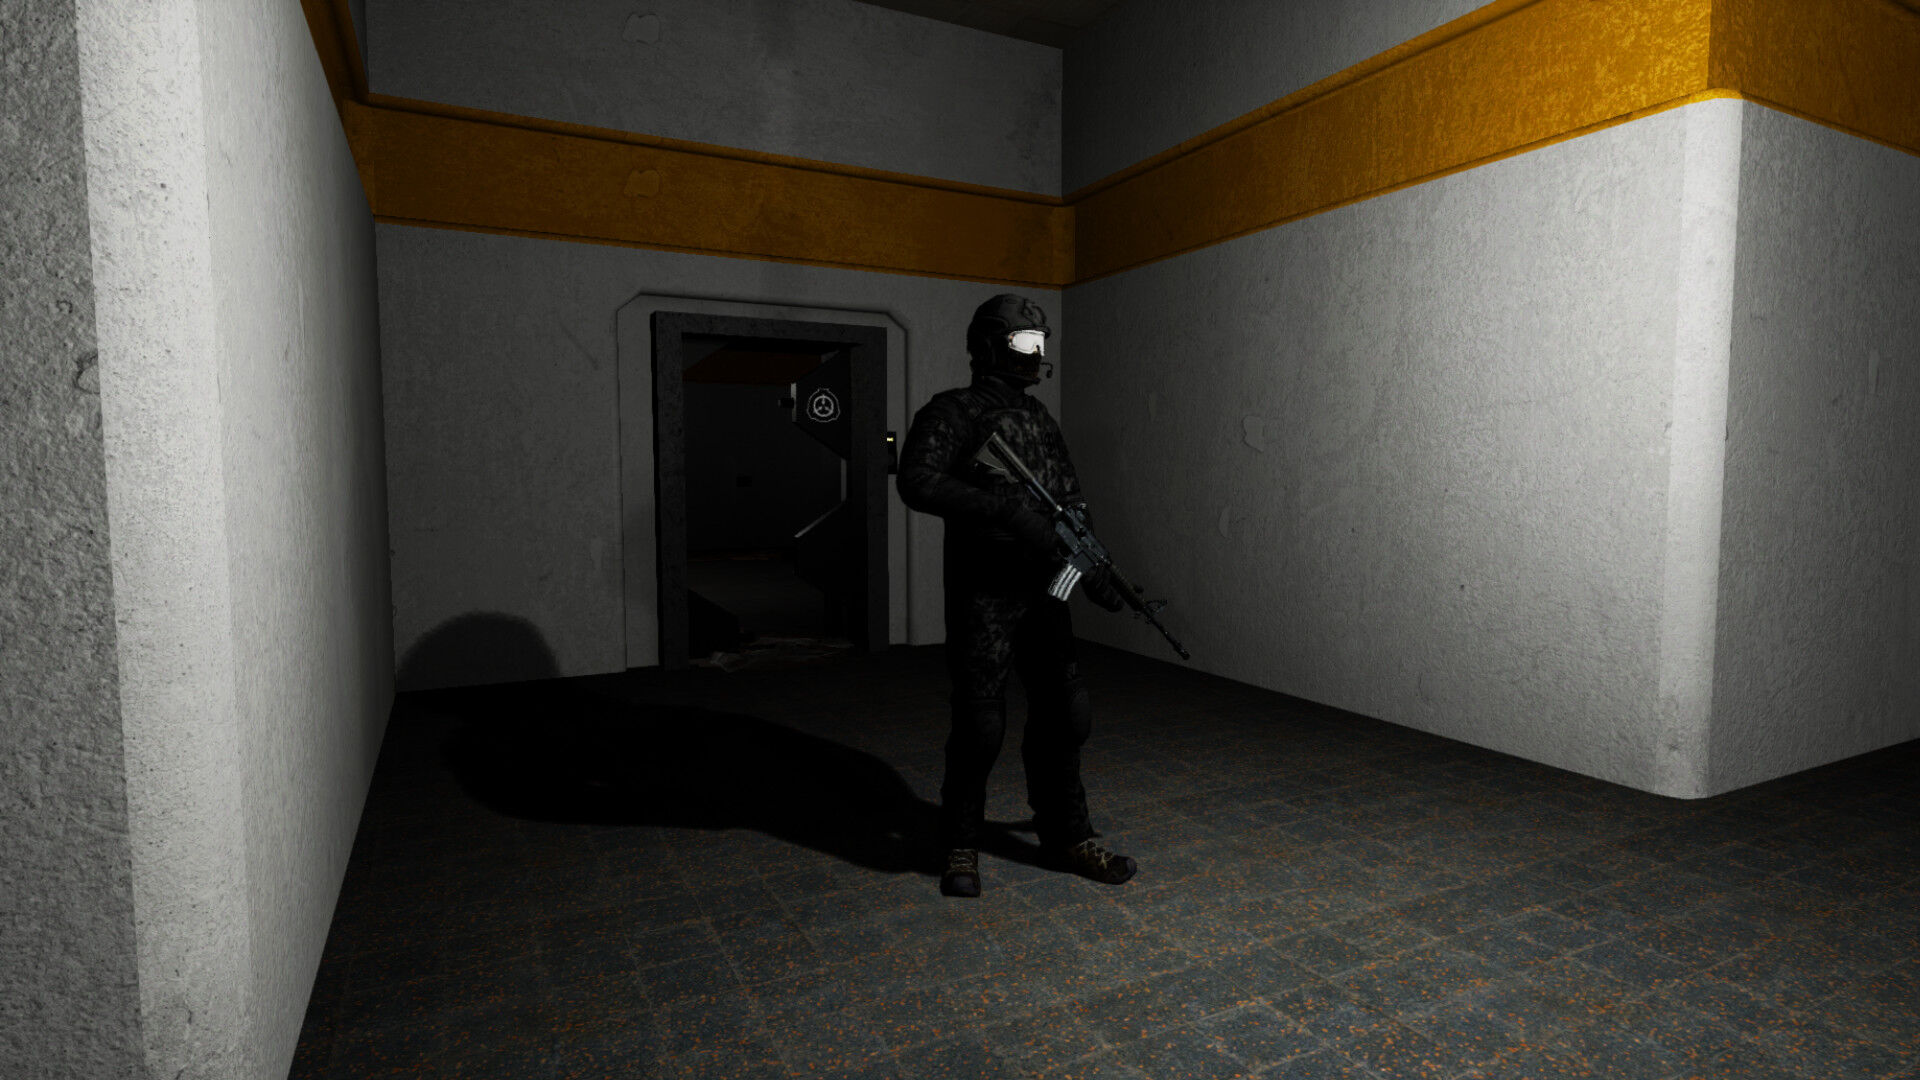 SCP Containment Breach Celebrates 10th Anniversary; 5 SCP Mods That Secure,  Contain, and Protect feature - IndieDB